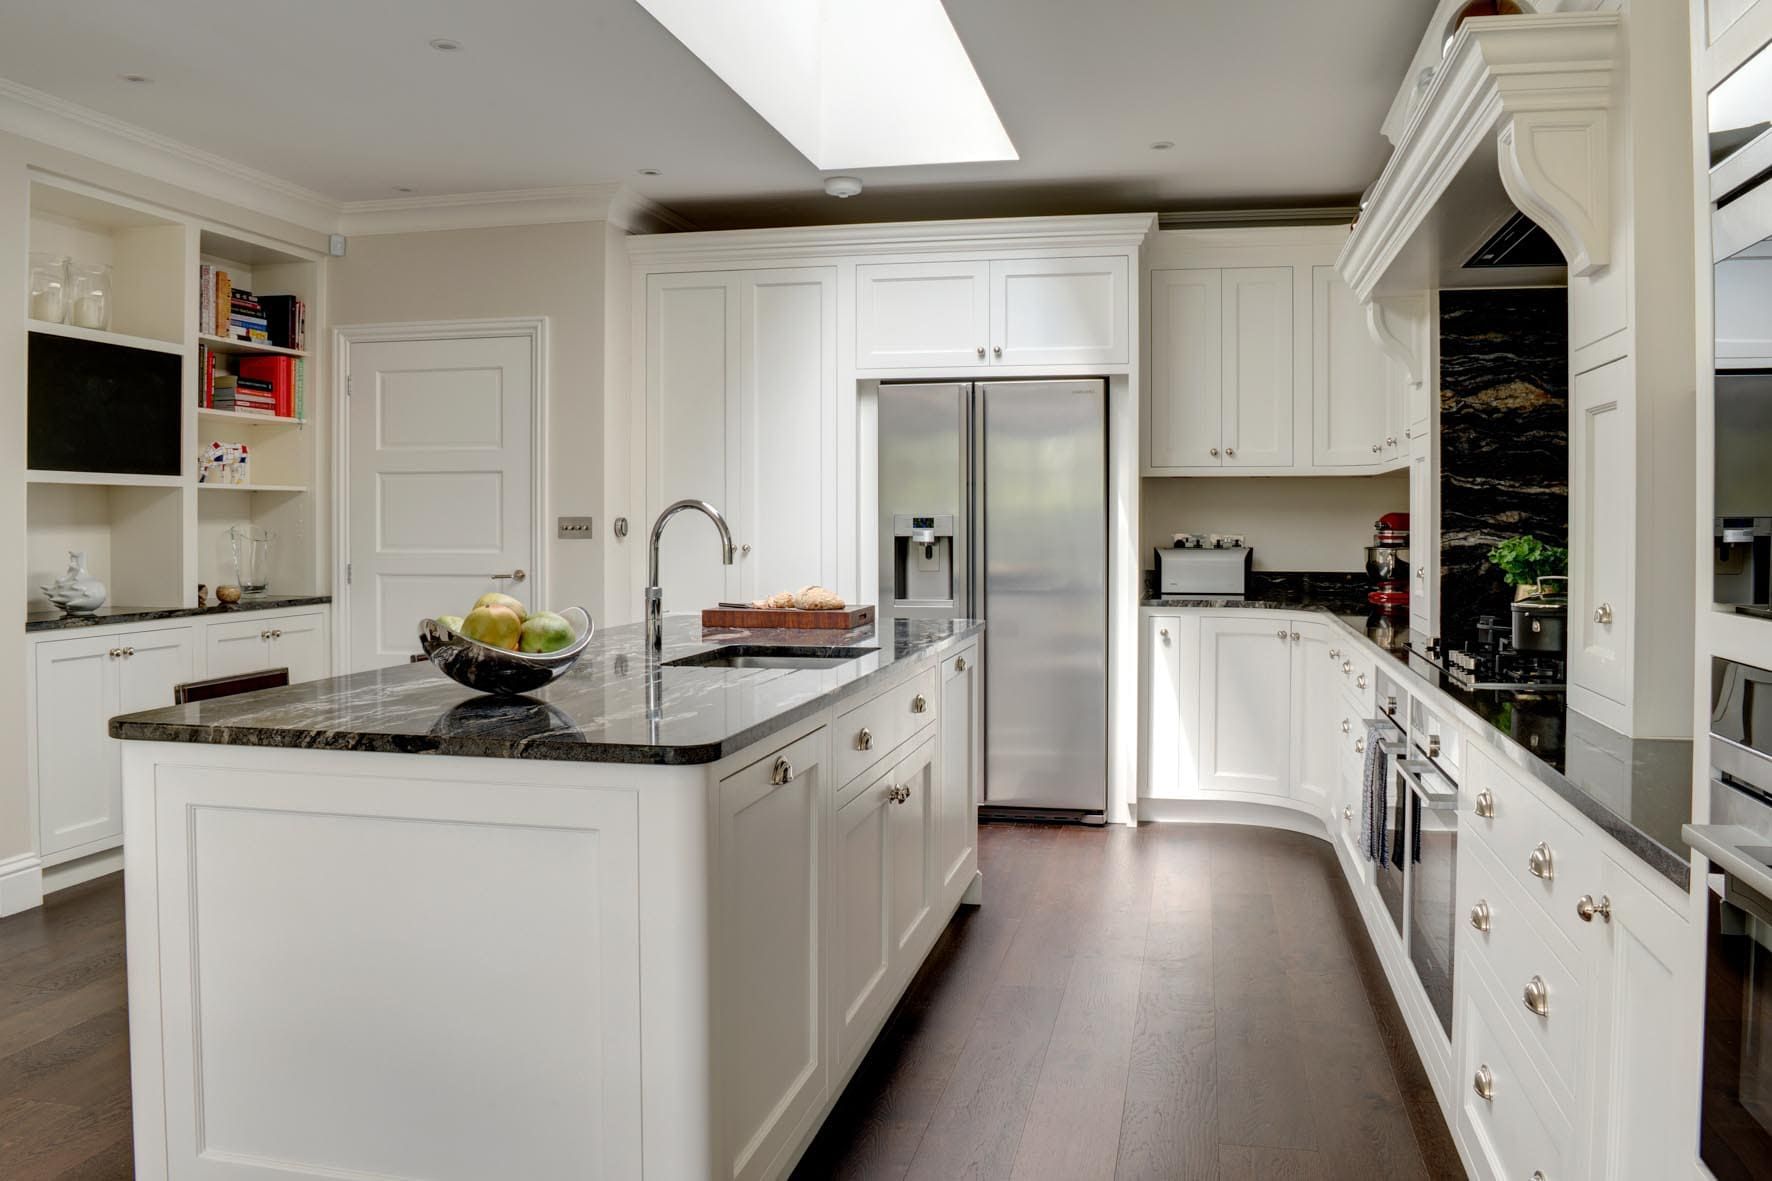 A bespoke traditional kitchen with white cabinets and black, granite worktops. A large skylight in the centre of the room bathes the kitchen in light.